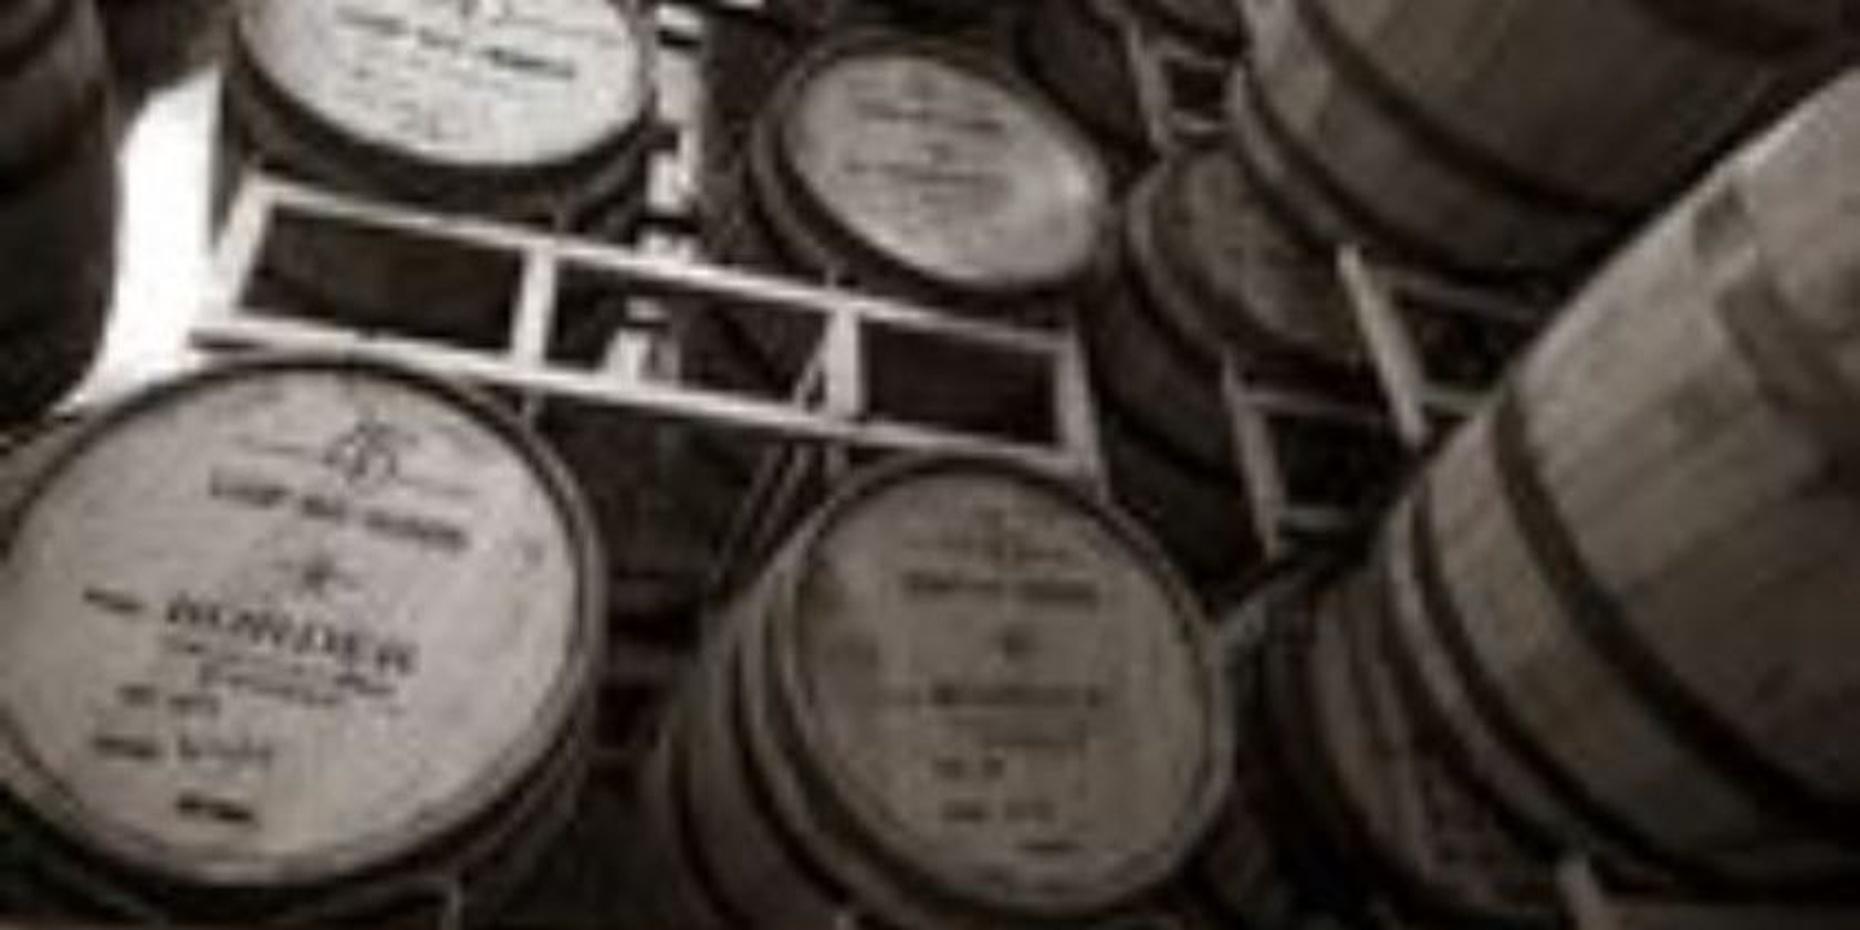 Distillery Tour & Tasting Package in New Richmond